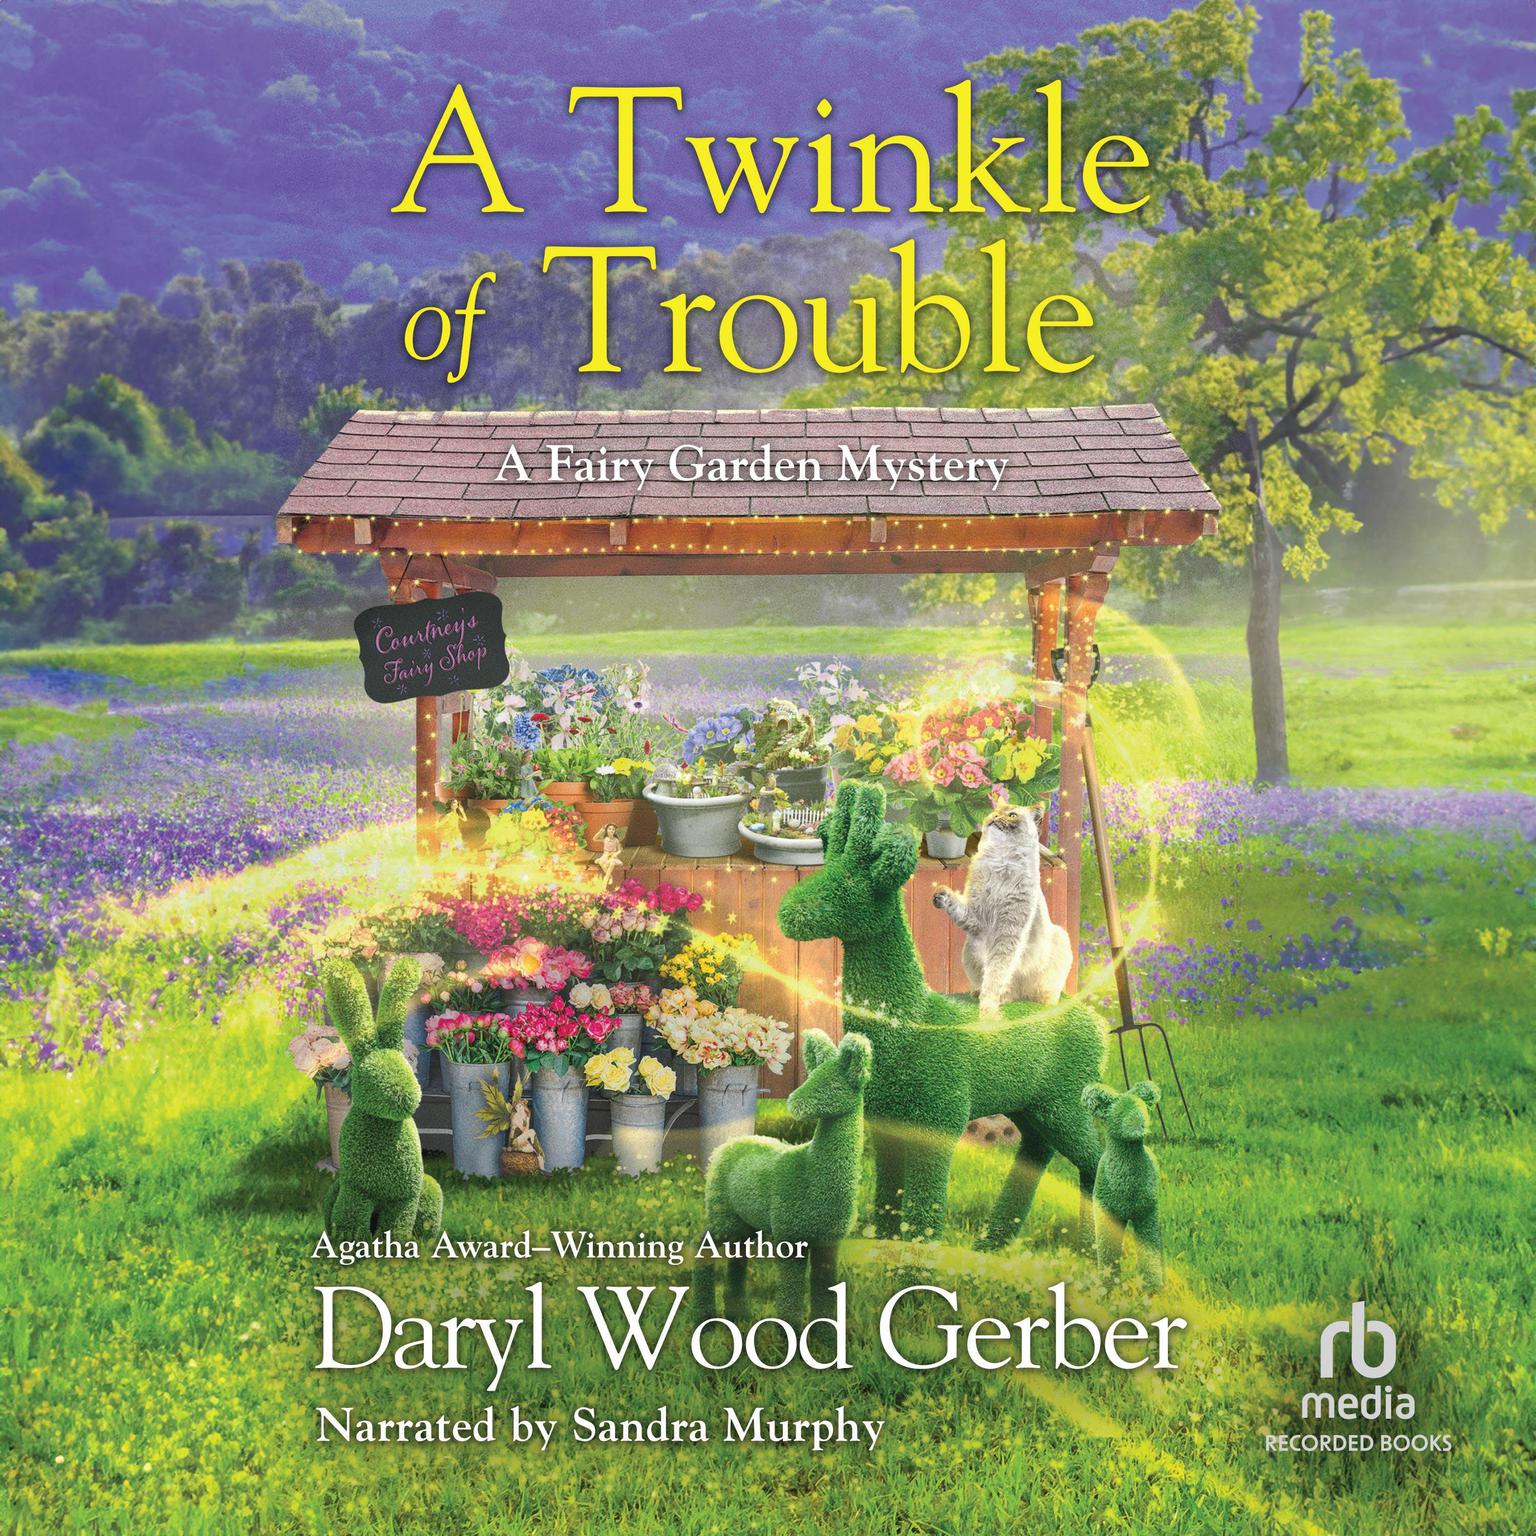 A Twinkle of Trouble Audiobook, by Daryl Wood Gerber